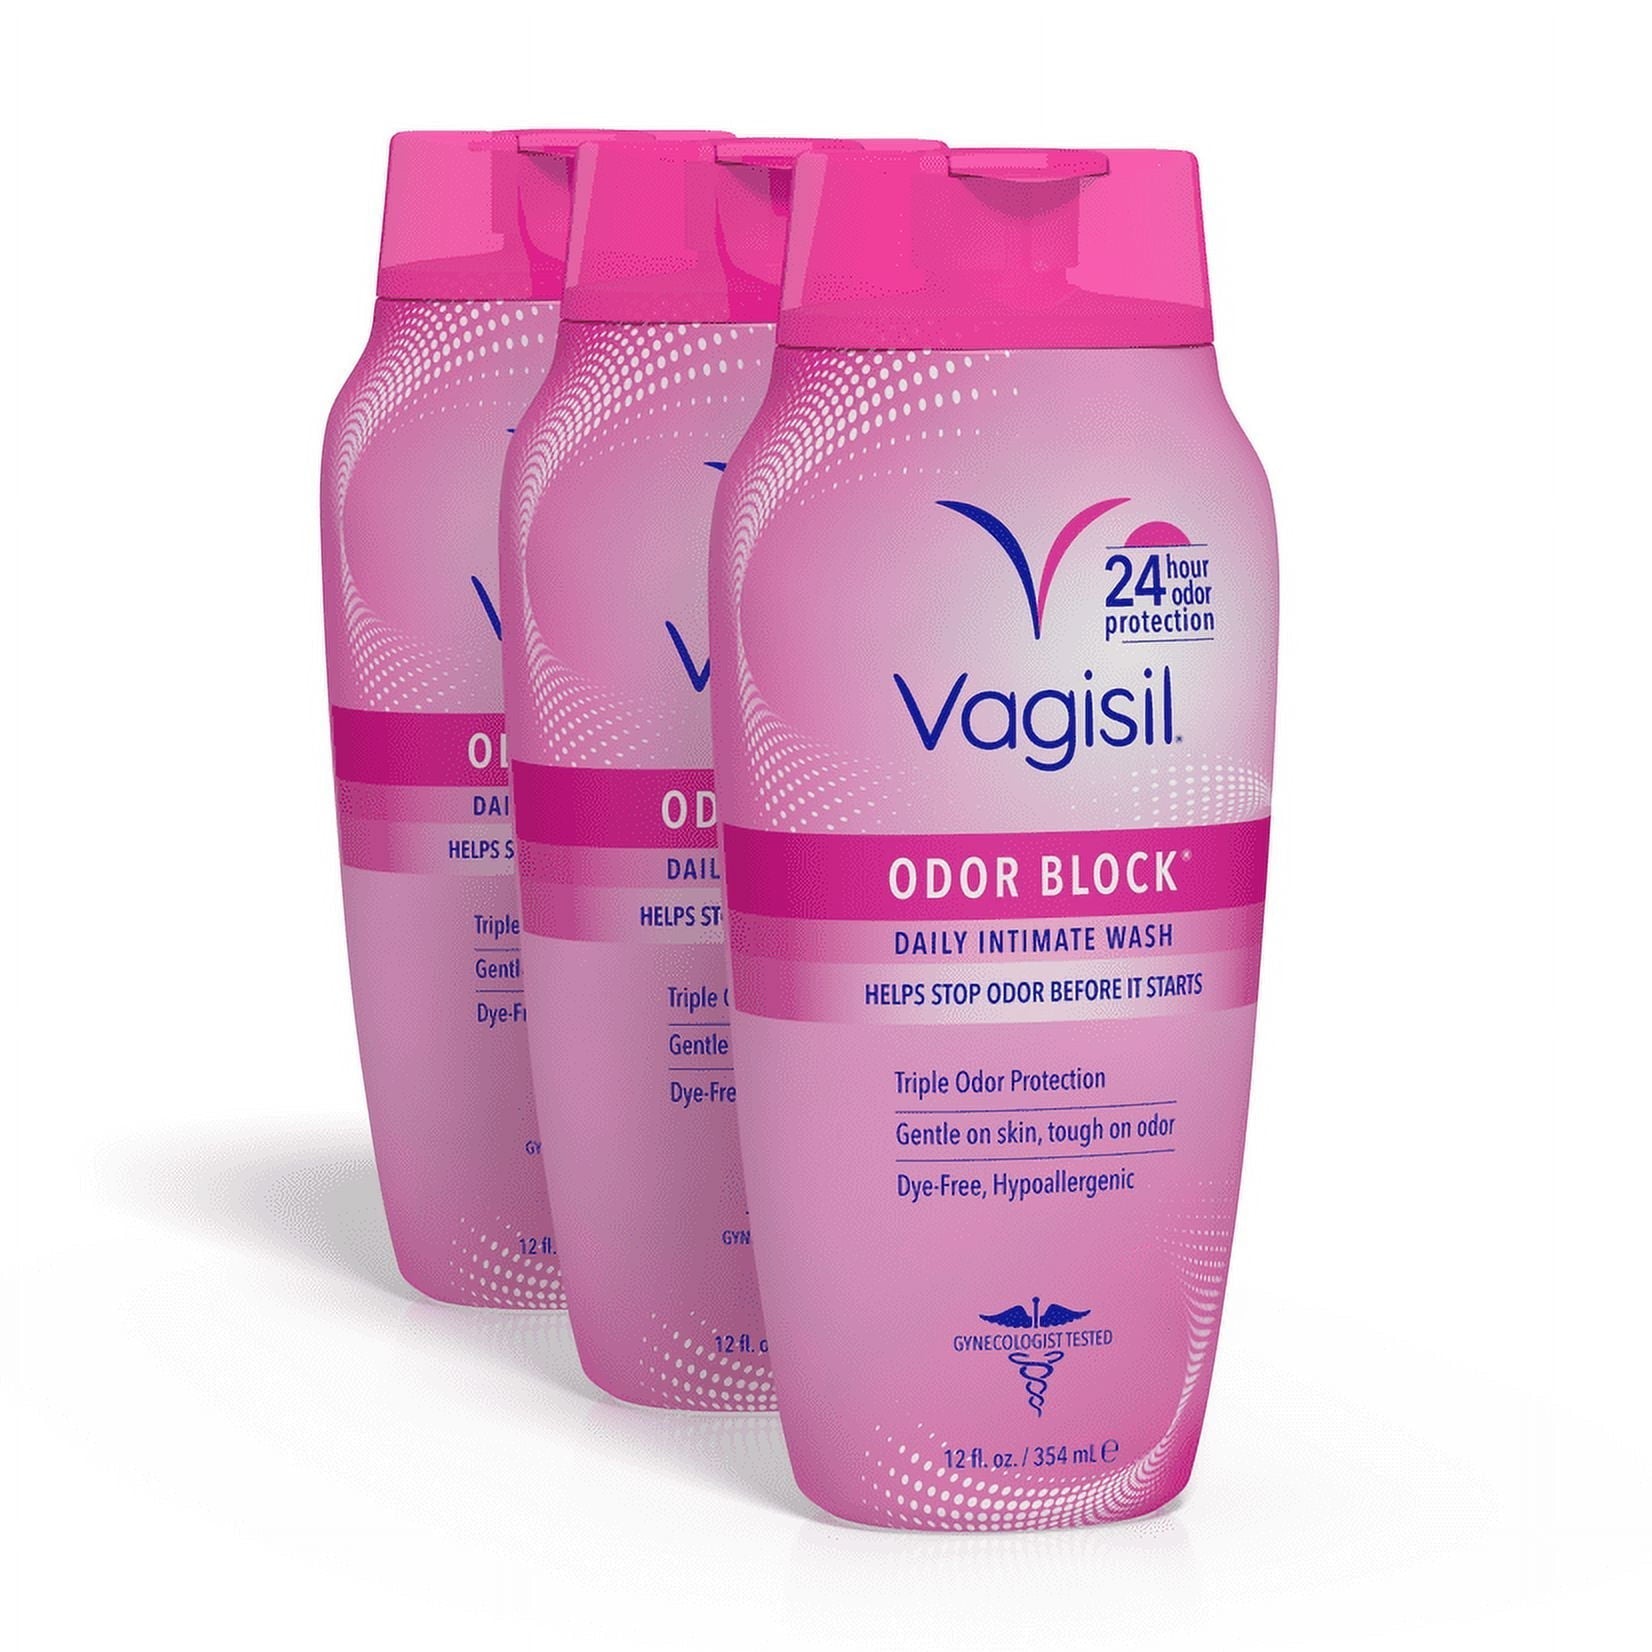 Wholesale prices with free shipping all over United States Vagisil Odor Block Daily Intimate Vaginal Feminine Wash, 12 oz., 3 Pack - Steven Deals